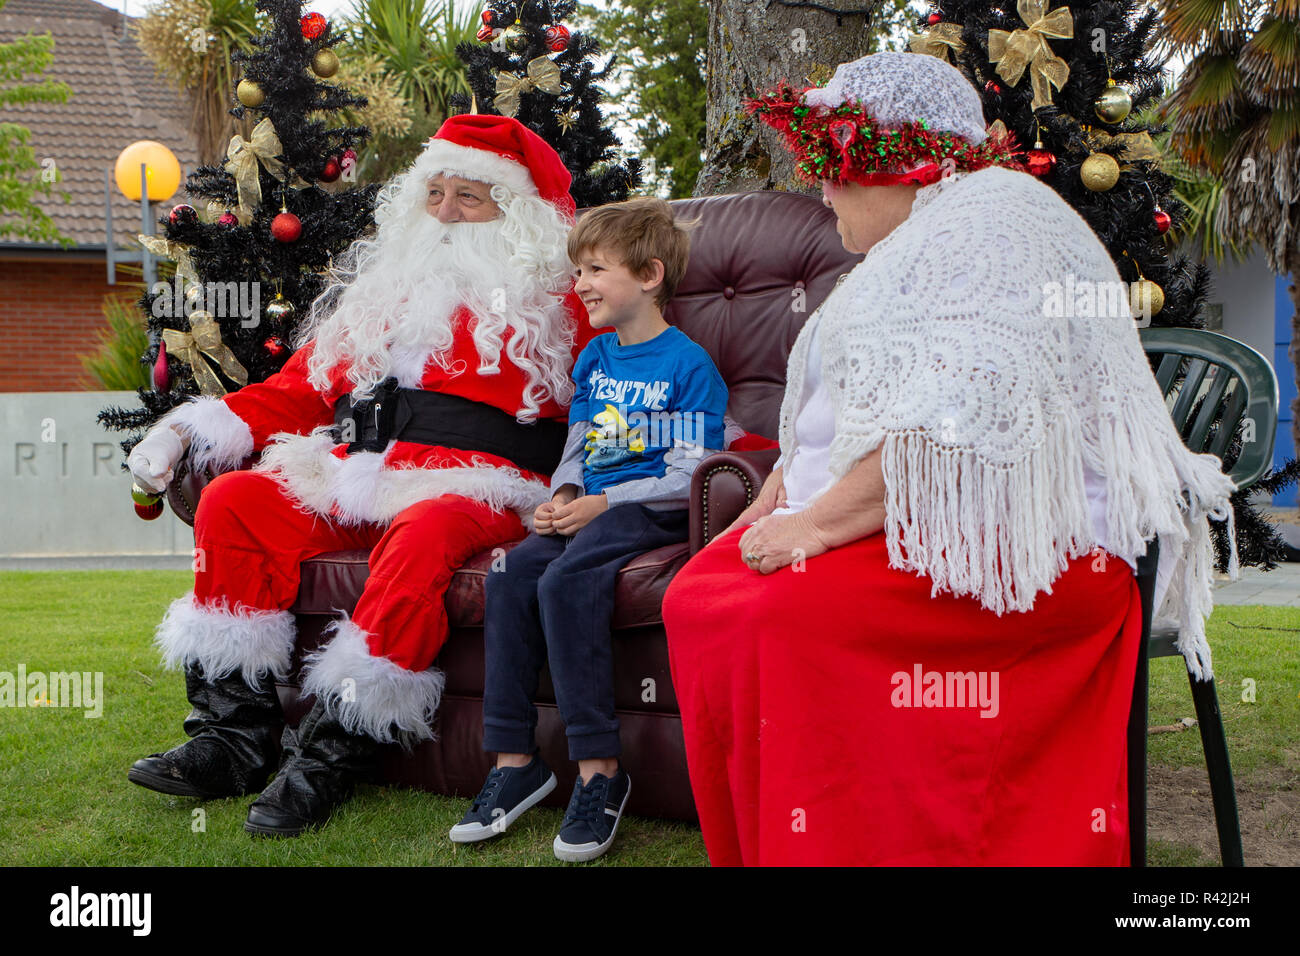 Rangiora, New Zealand - November 23 2018: Father and Mother Christmas listen to a child's Christmas wishes at the Christmas town festival Stock Photo